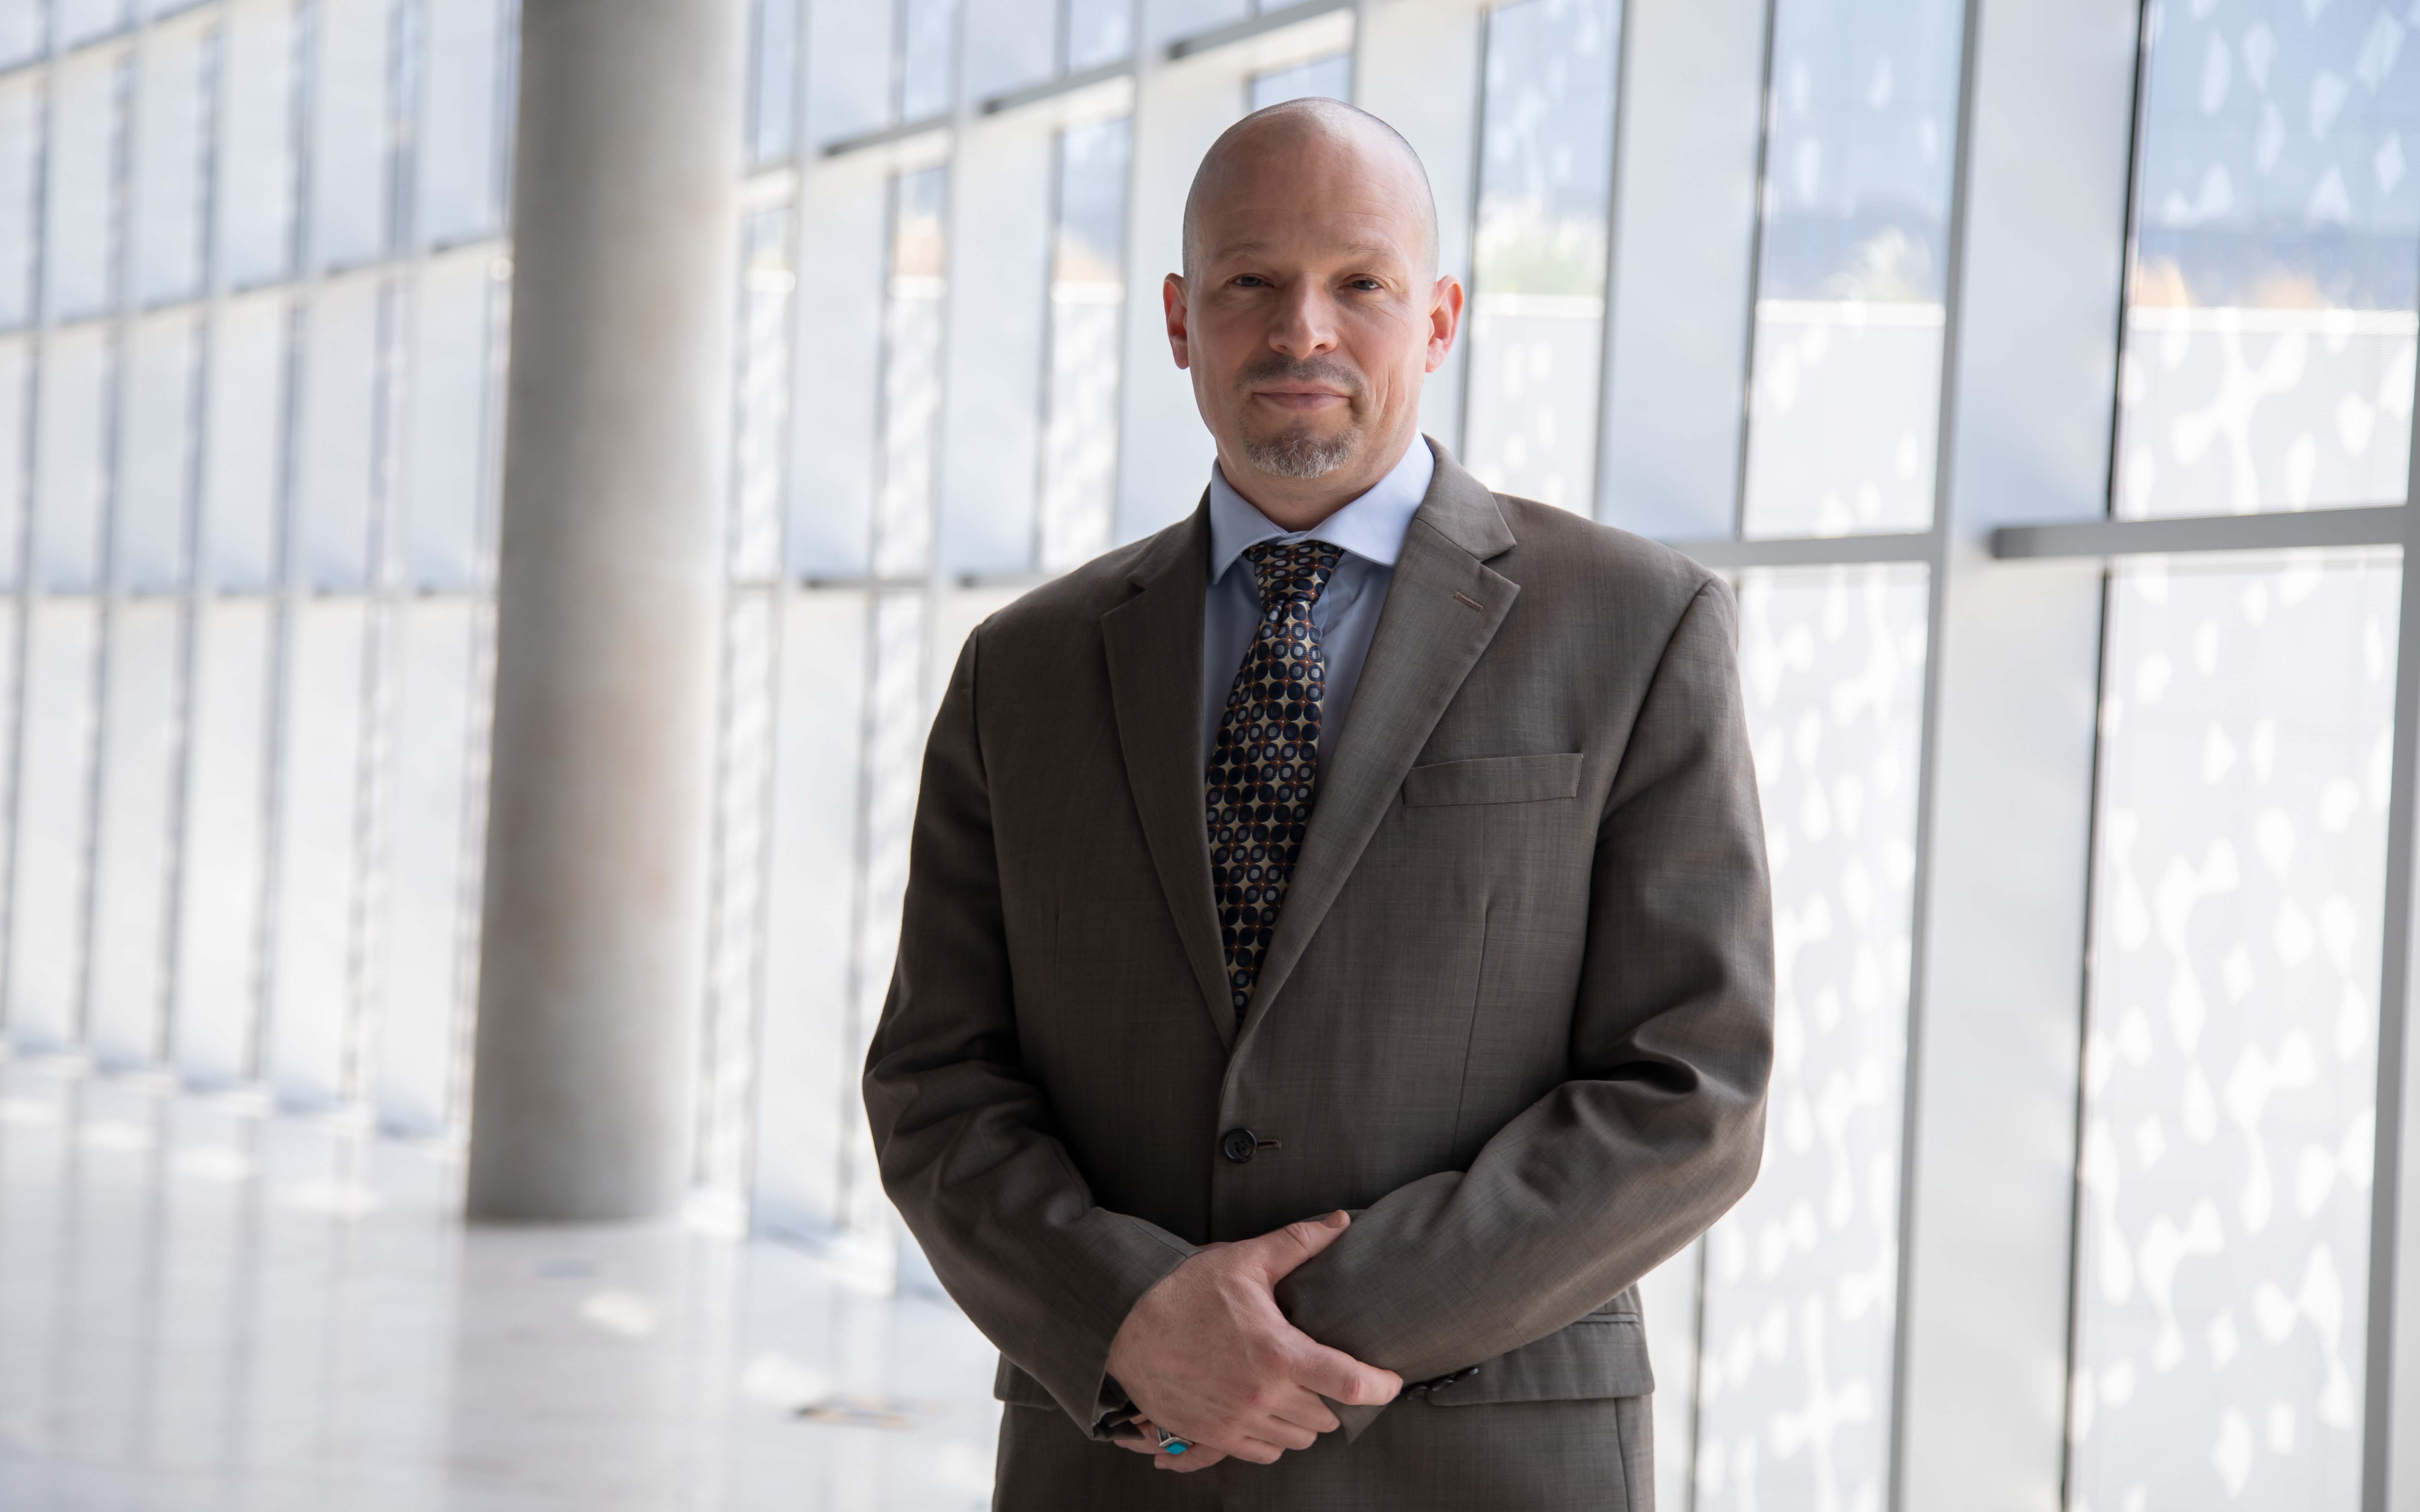 Professor Zachary Wright will work with faculty to ensure their continued growth and success